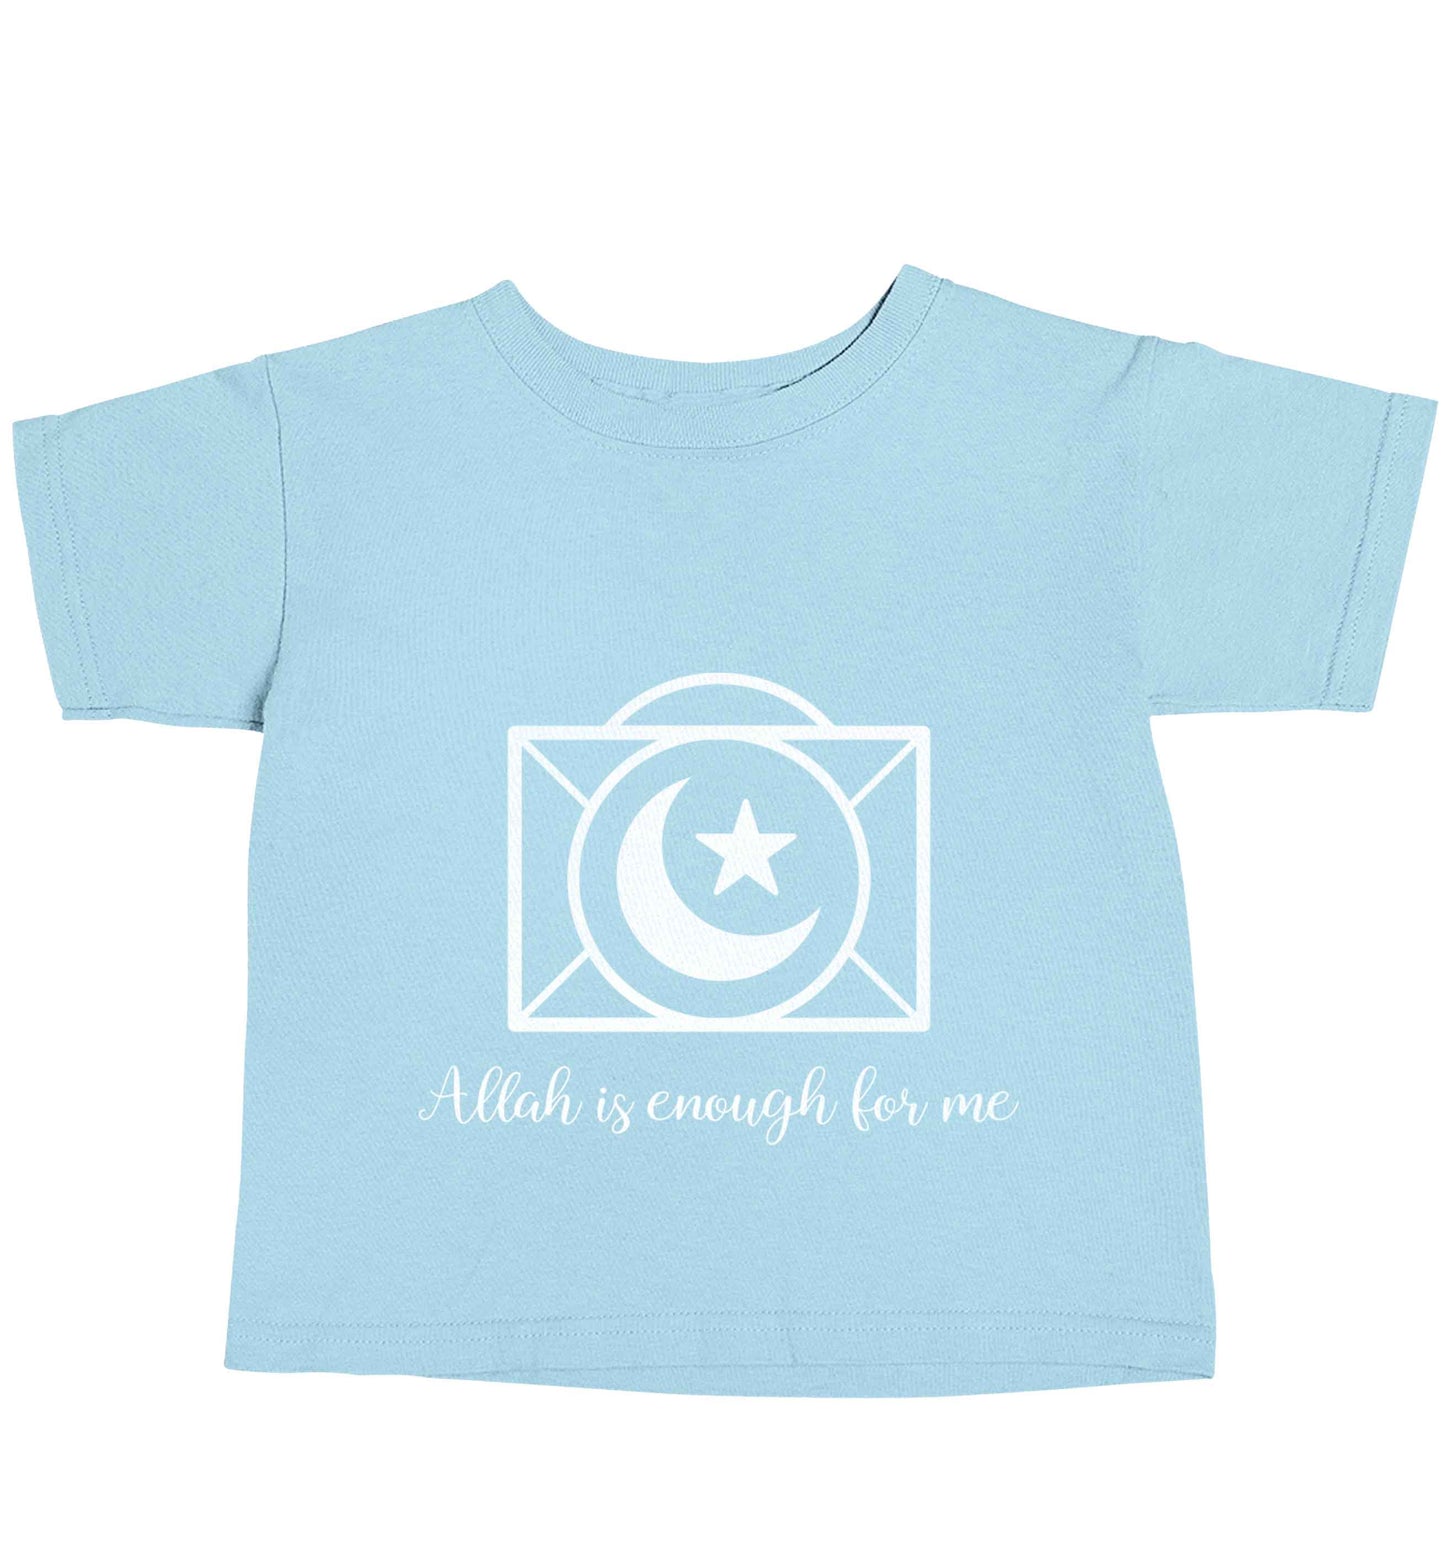 Allah is enough for me light blue baby toddler Tshirt 2 Years